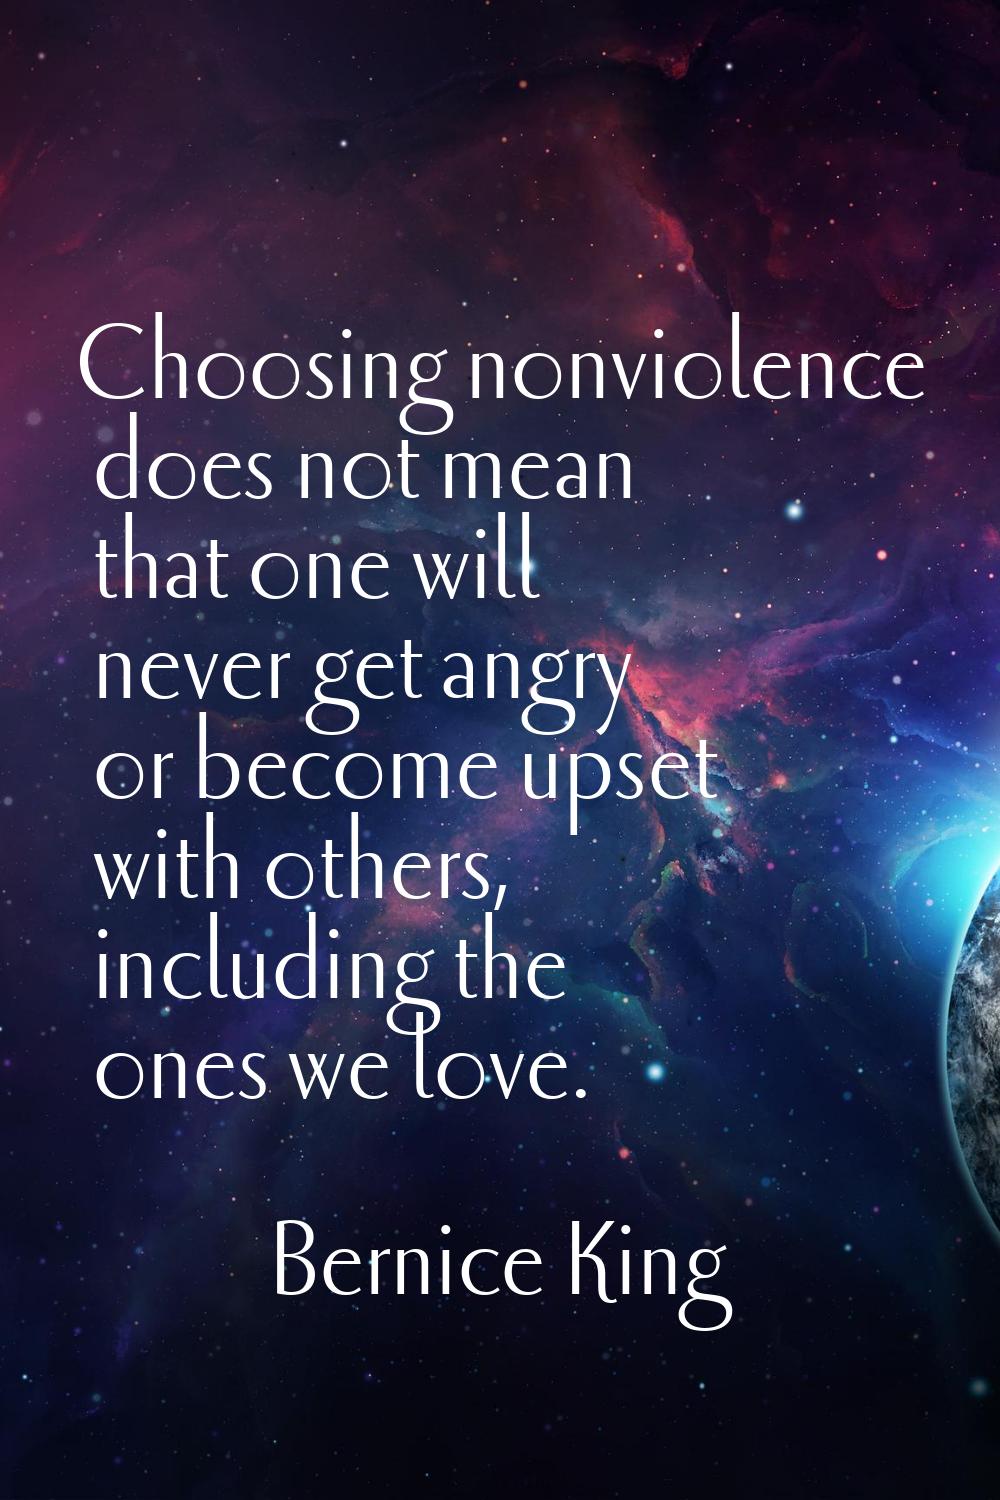 Choosing nonviolence does not mean that one will never get angry or become upset with others, inclu